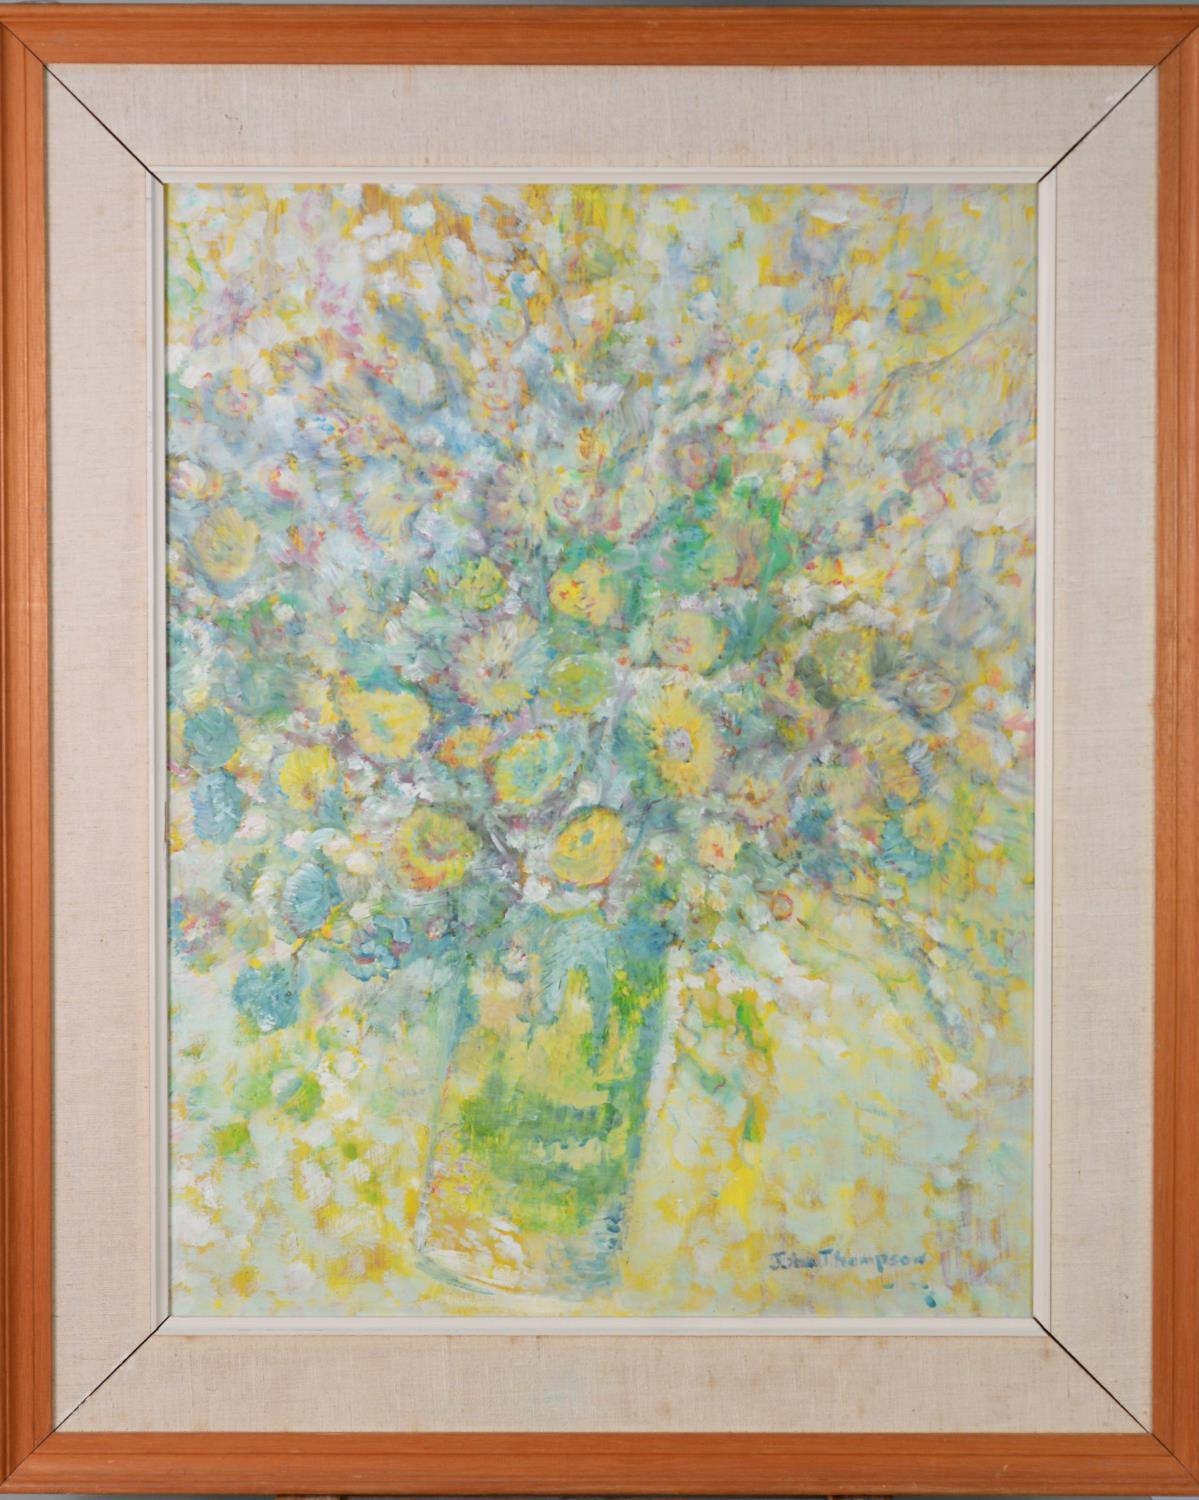 JOHN THOMPSON (1924-2011) OIL PAINTING Flowers in a Vase Signed 24 ½” x 18 ½” (62.2cm x 47cm) - Image 2 of 2